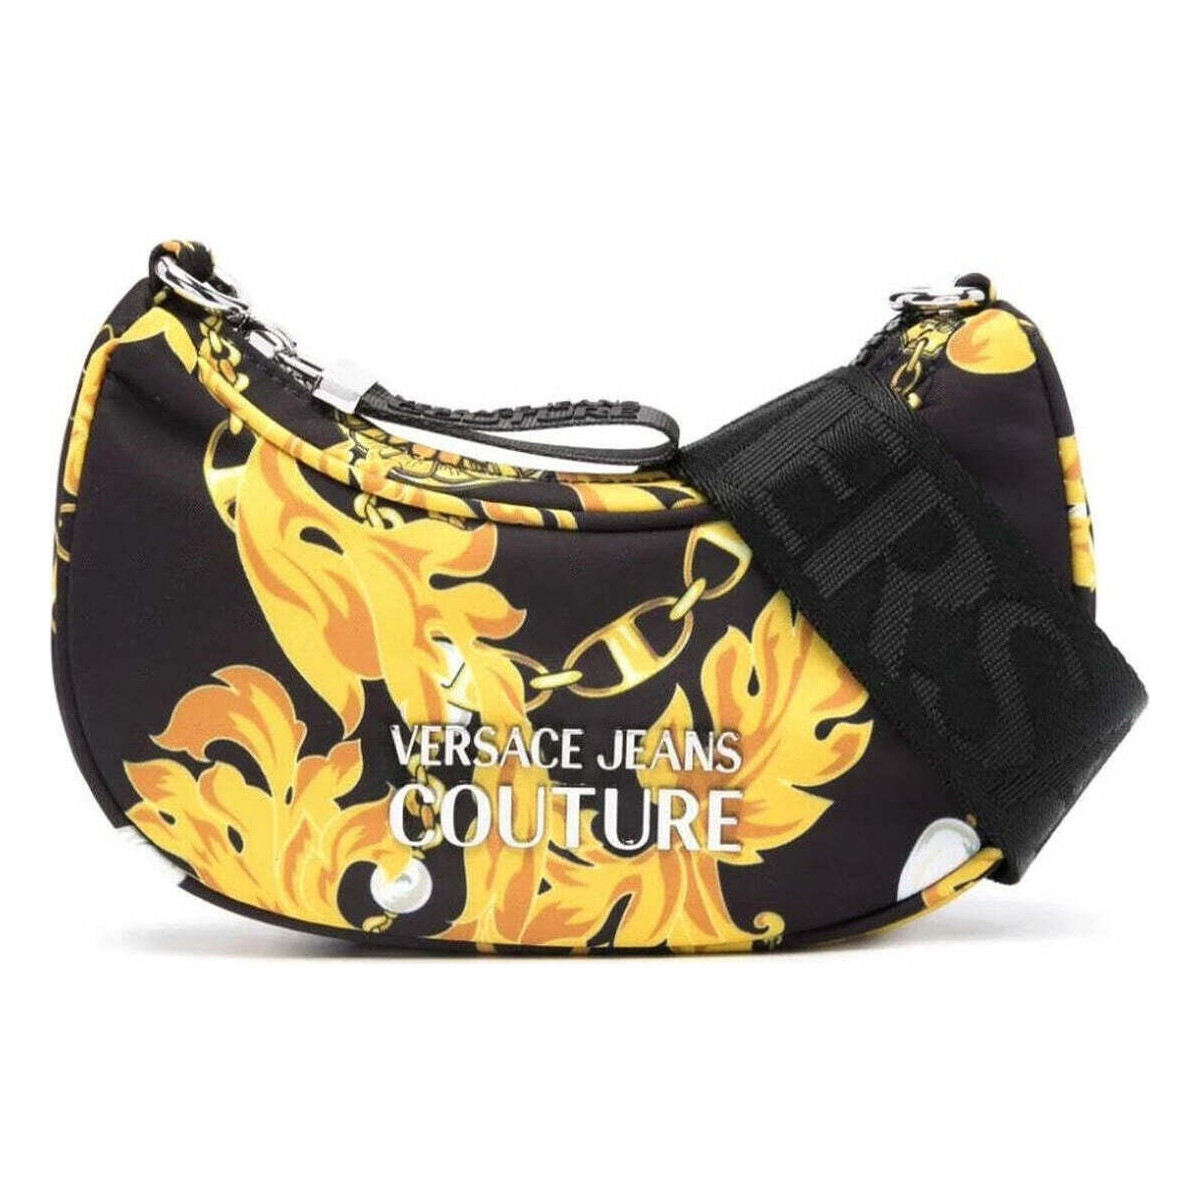 Versace Jeans Couture Multicolore sporty logo hobo bag tHUrryYC